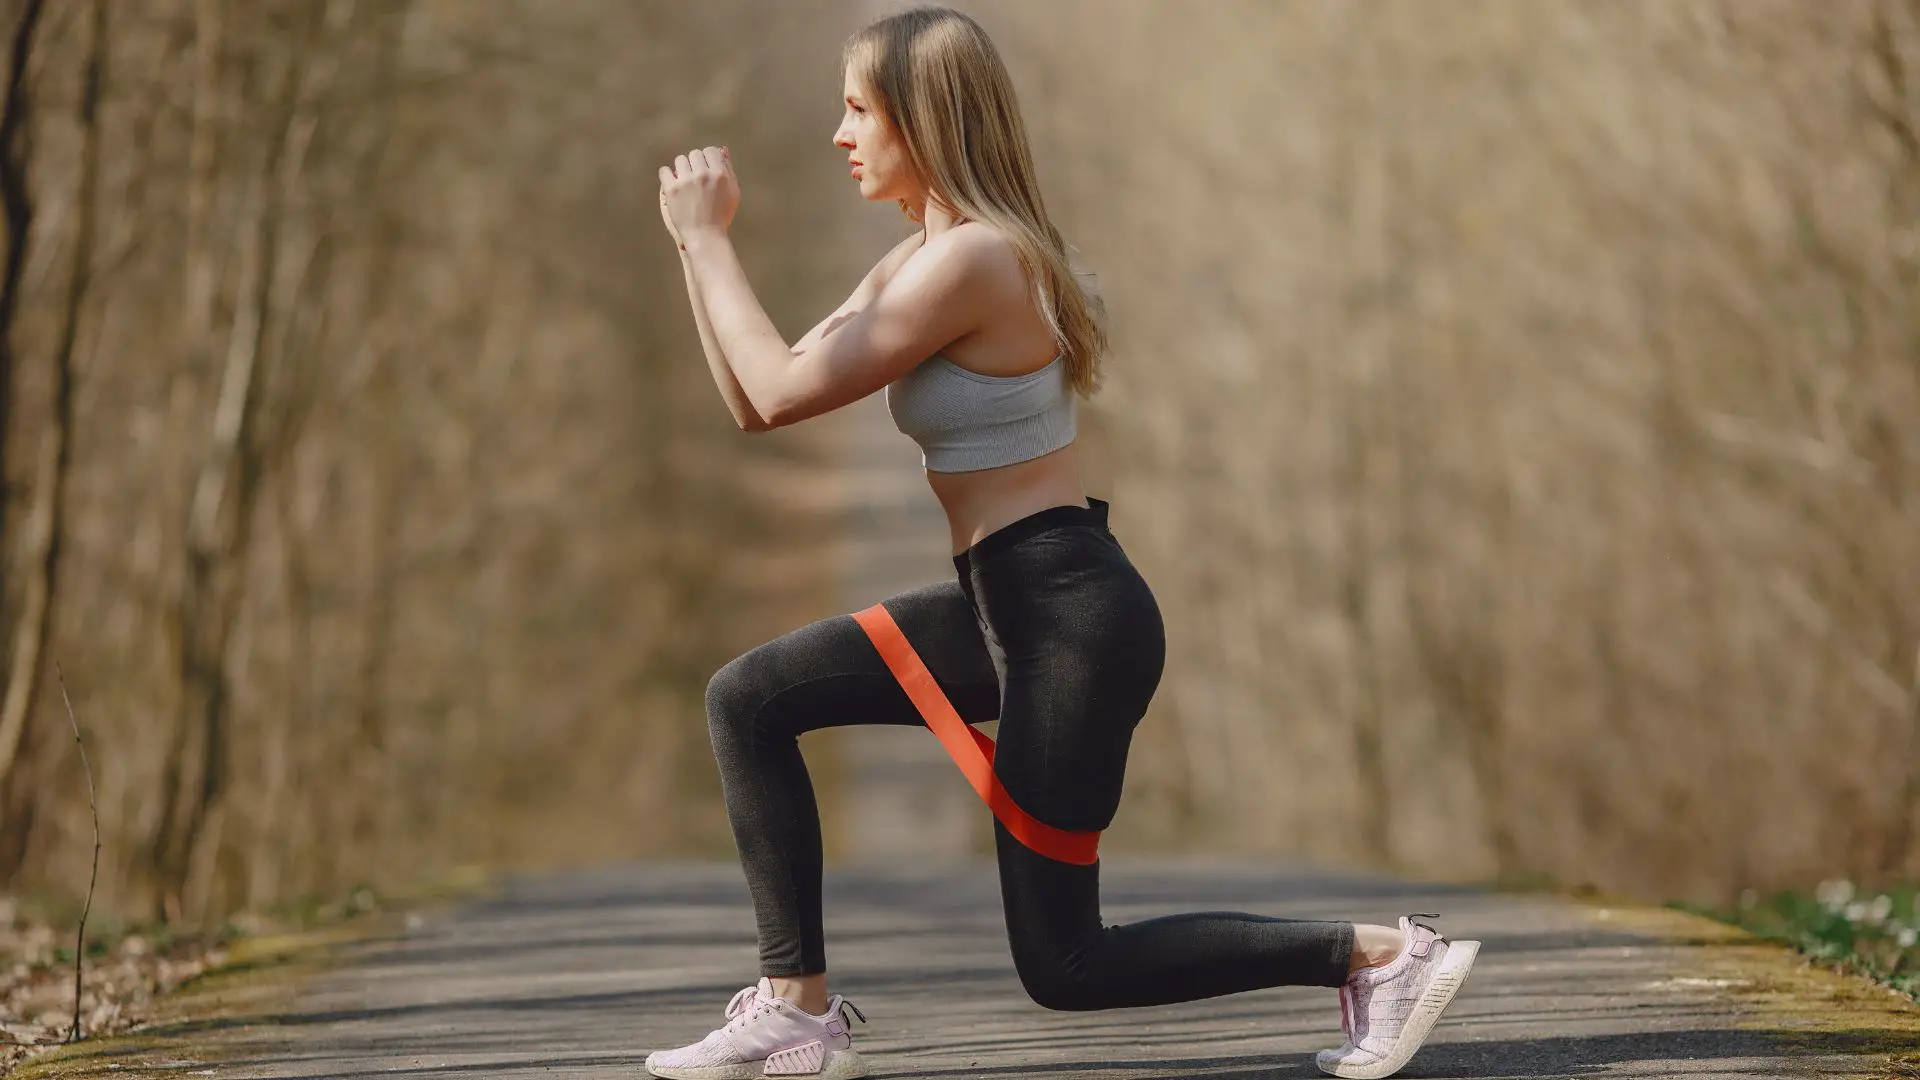 Resistance Band Workout